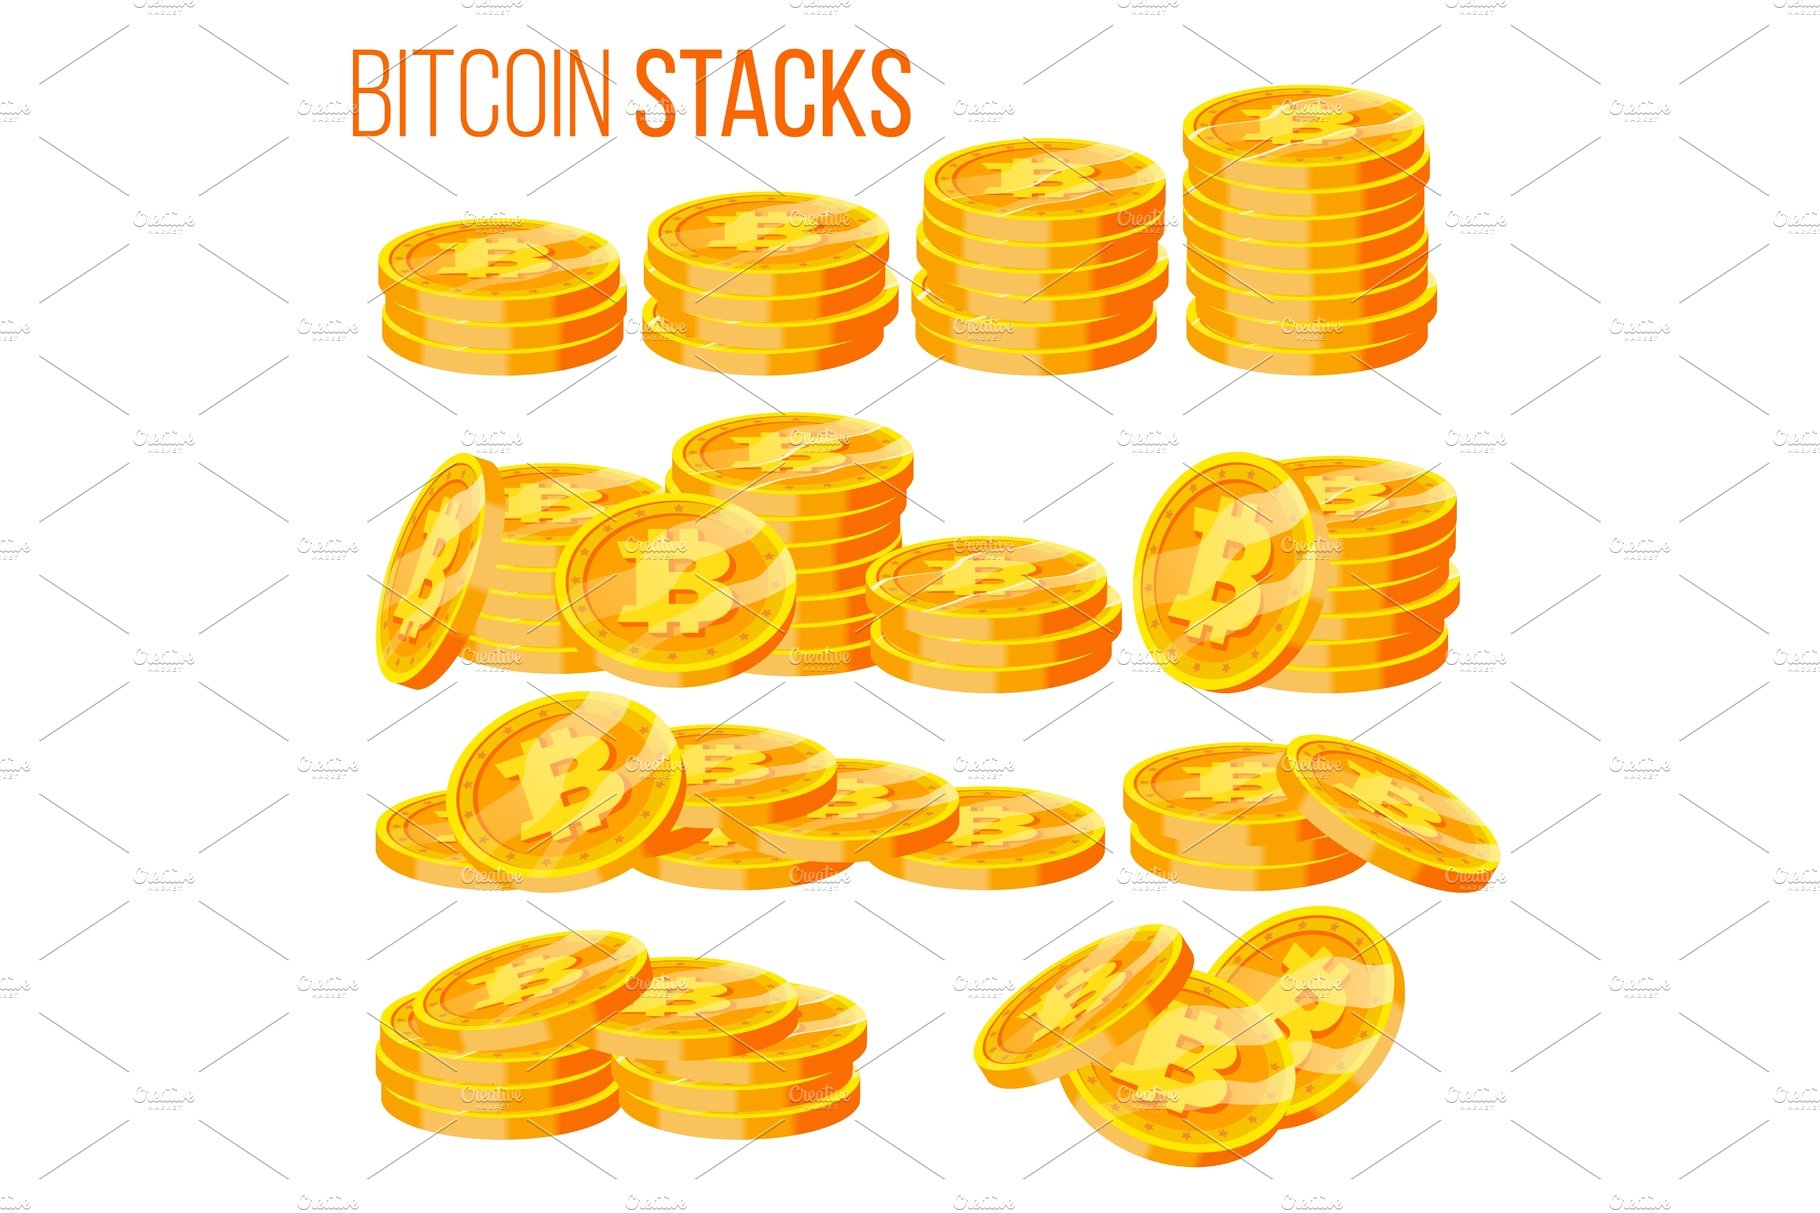 A bunch of bitcoin stacks stacked on top of each other.